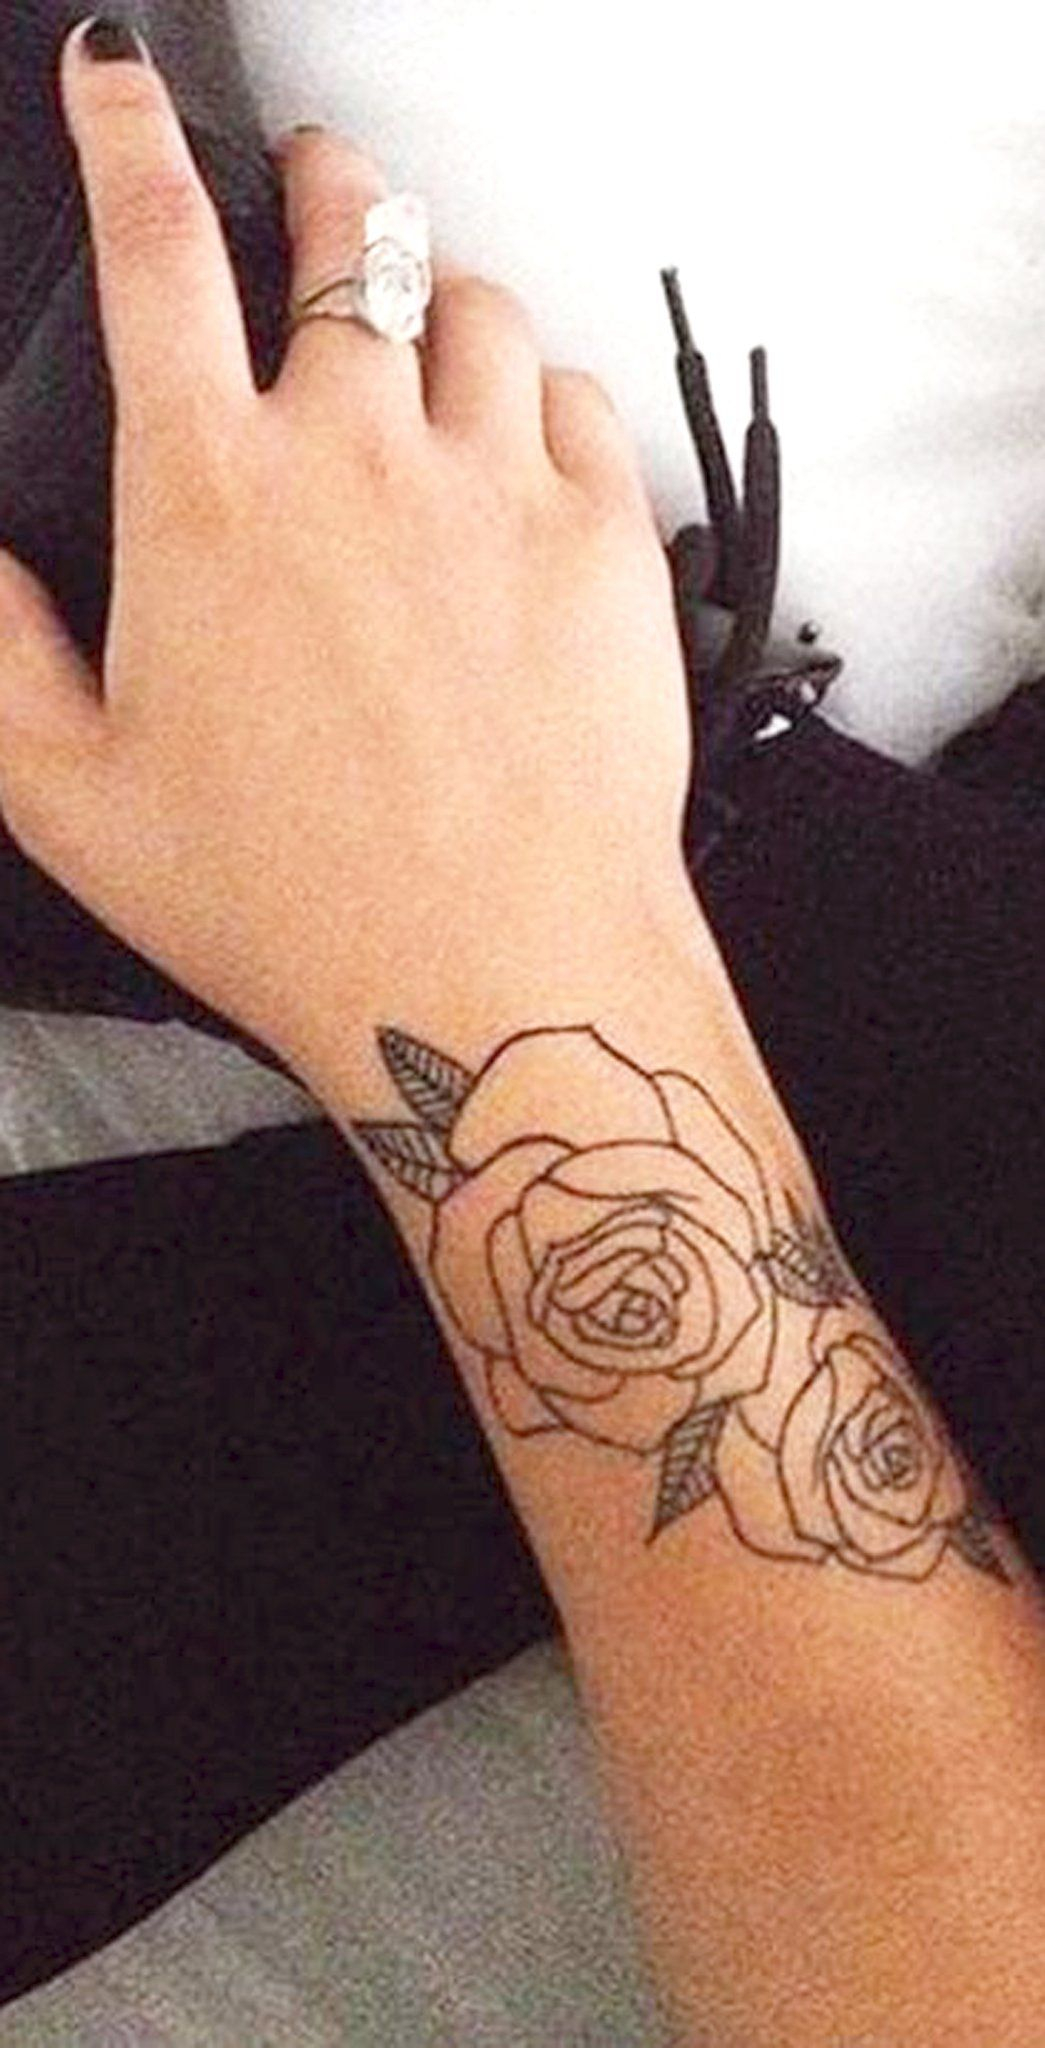 Realistic Minimal Rose Outer Forearm Tattoo Ideas For Women for dimensions 1045 X 2048